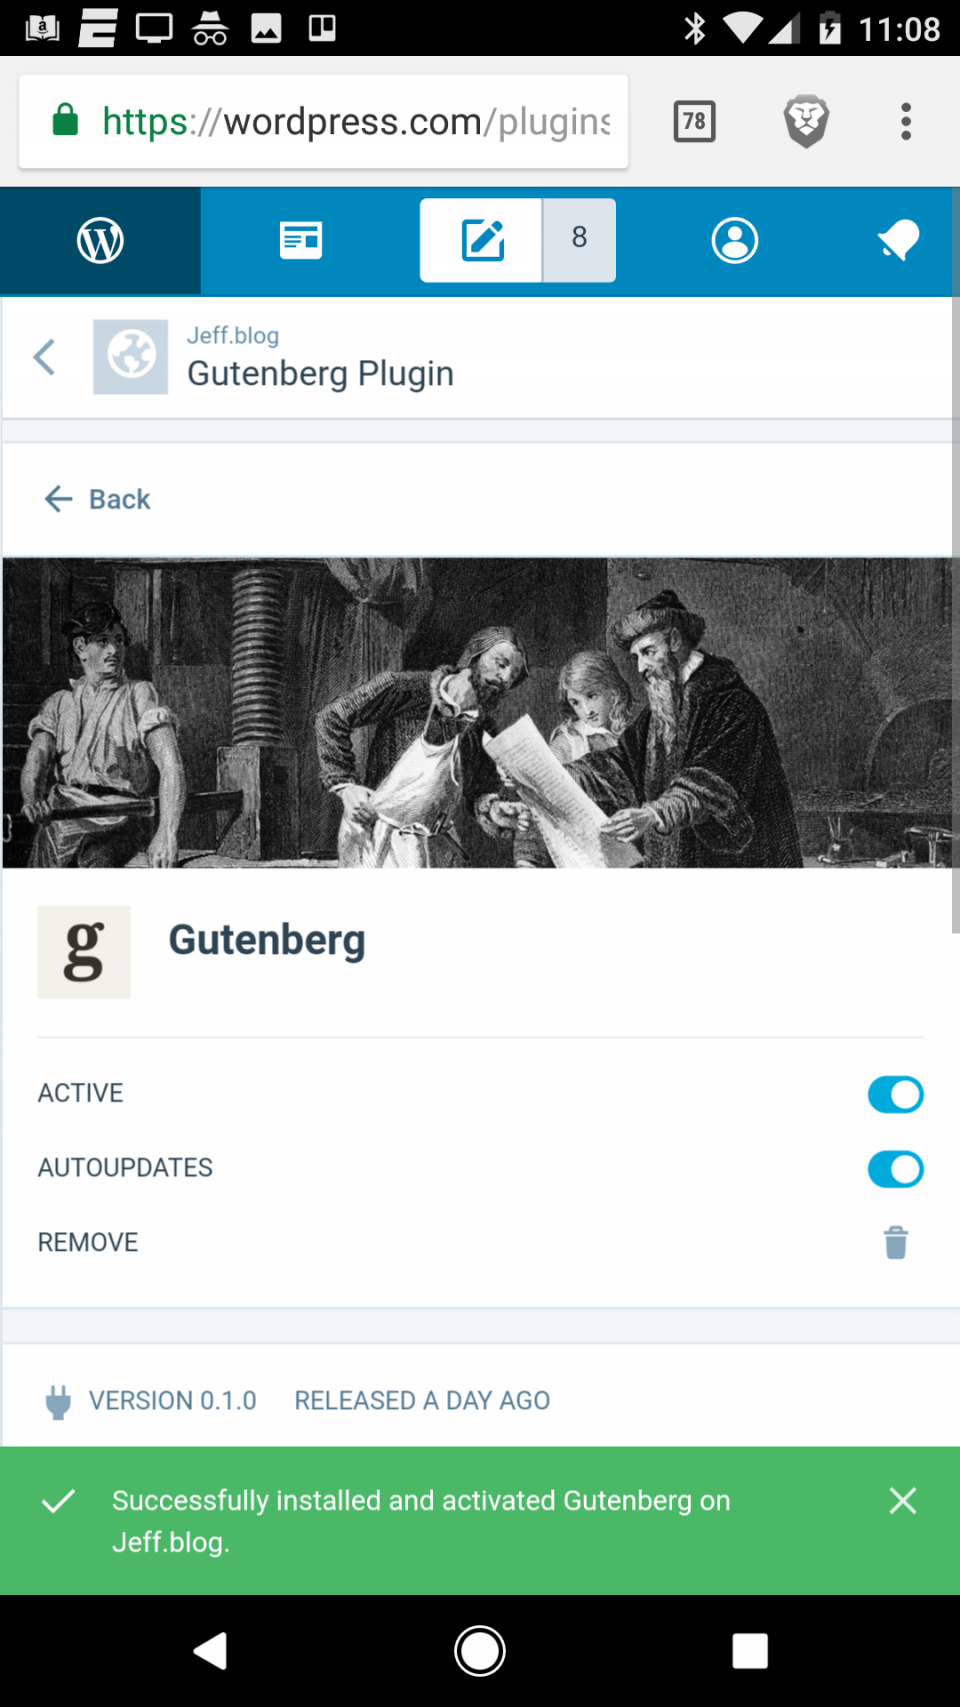 This Post is Brought to You by Gutenberg